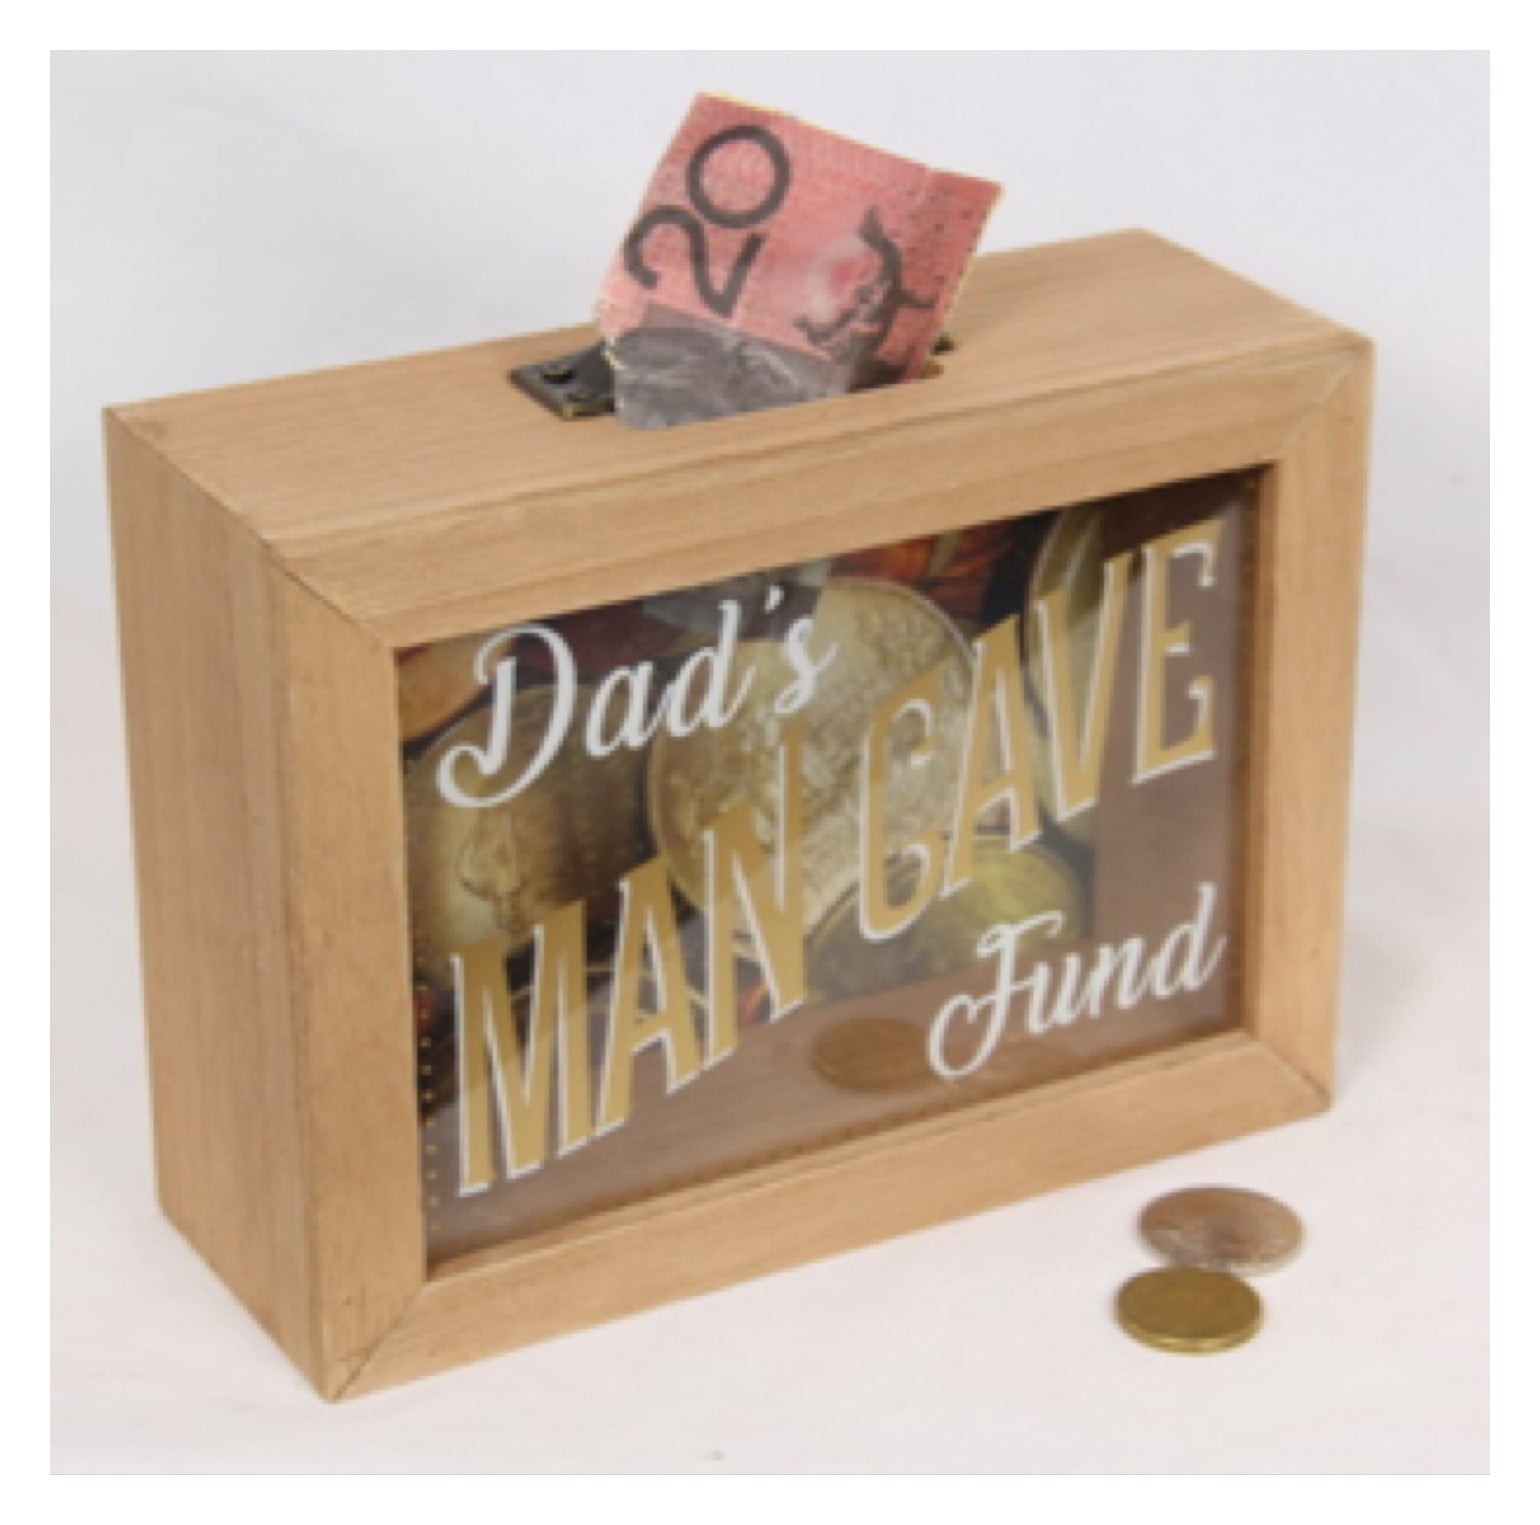 Money Box Dads Man Cave Fund Garage Rustic - The Renmy Store Homewares & Gifts 